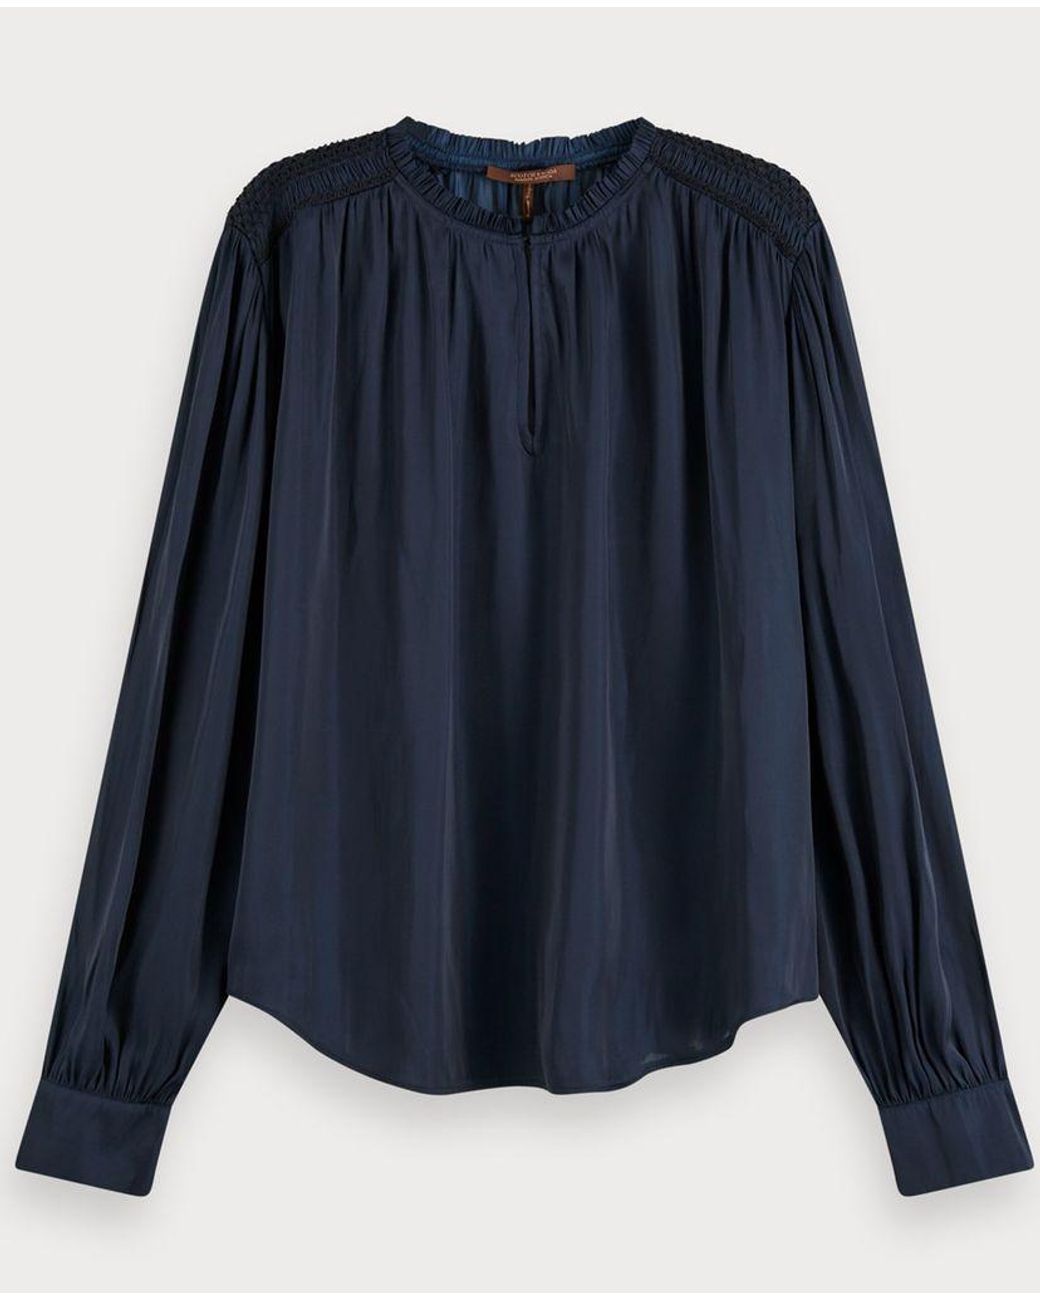 Scotch & Soda Synthetic Smocked Ruffle Top in Blue - Lyst